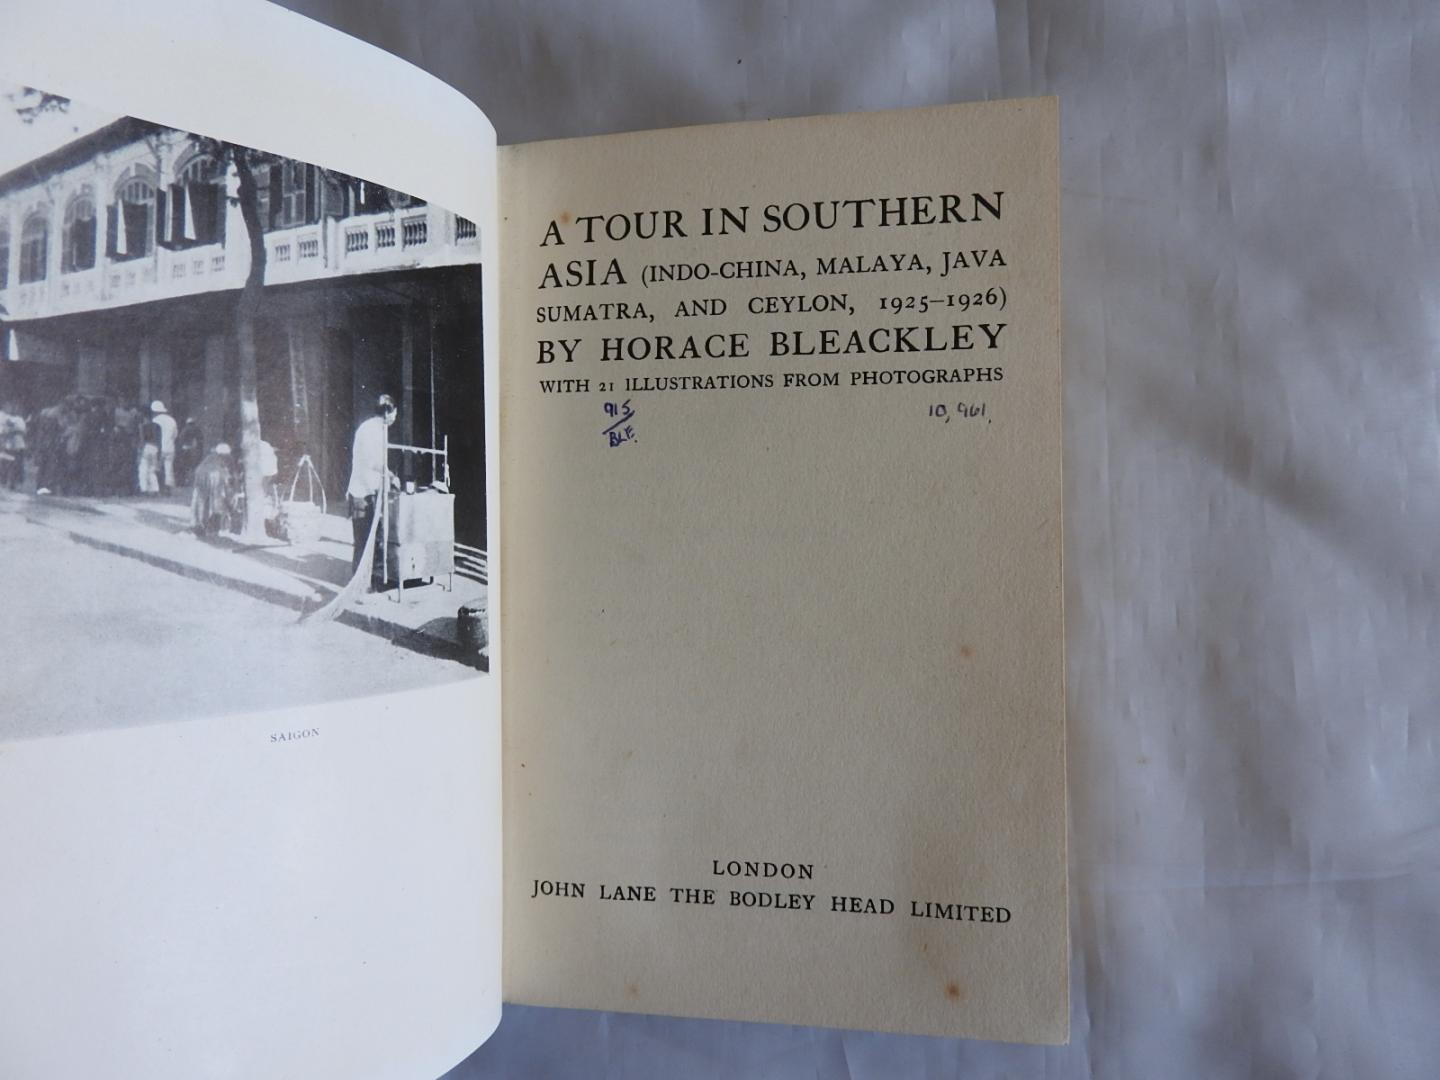 Bleackley, Horace - A Tour in Southern Asia - Indo-China, Malaya, Java, Sumatra, and Ceylon, 1925-1926